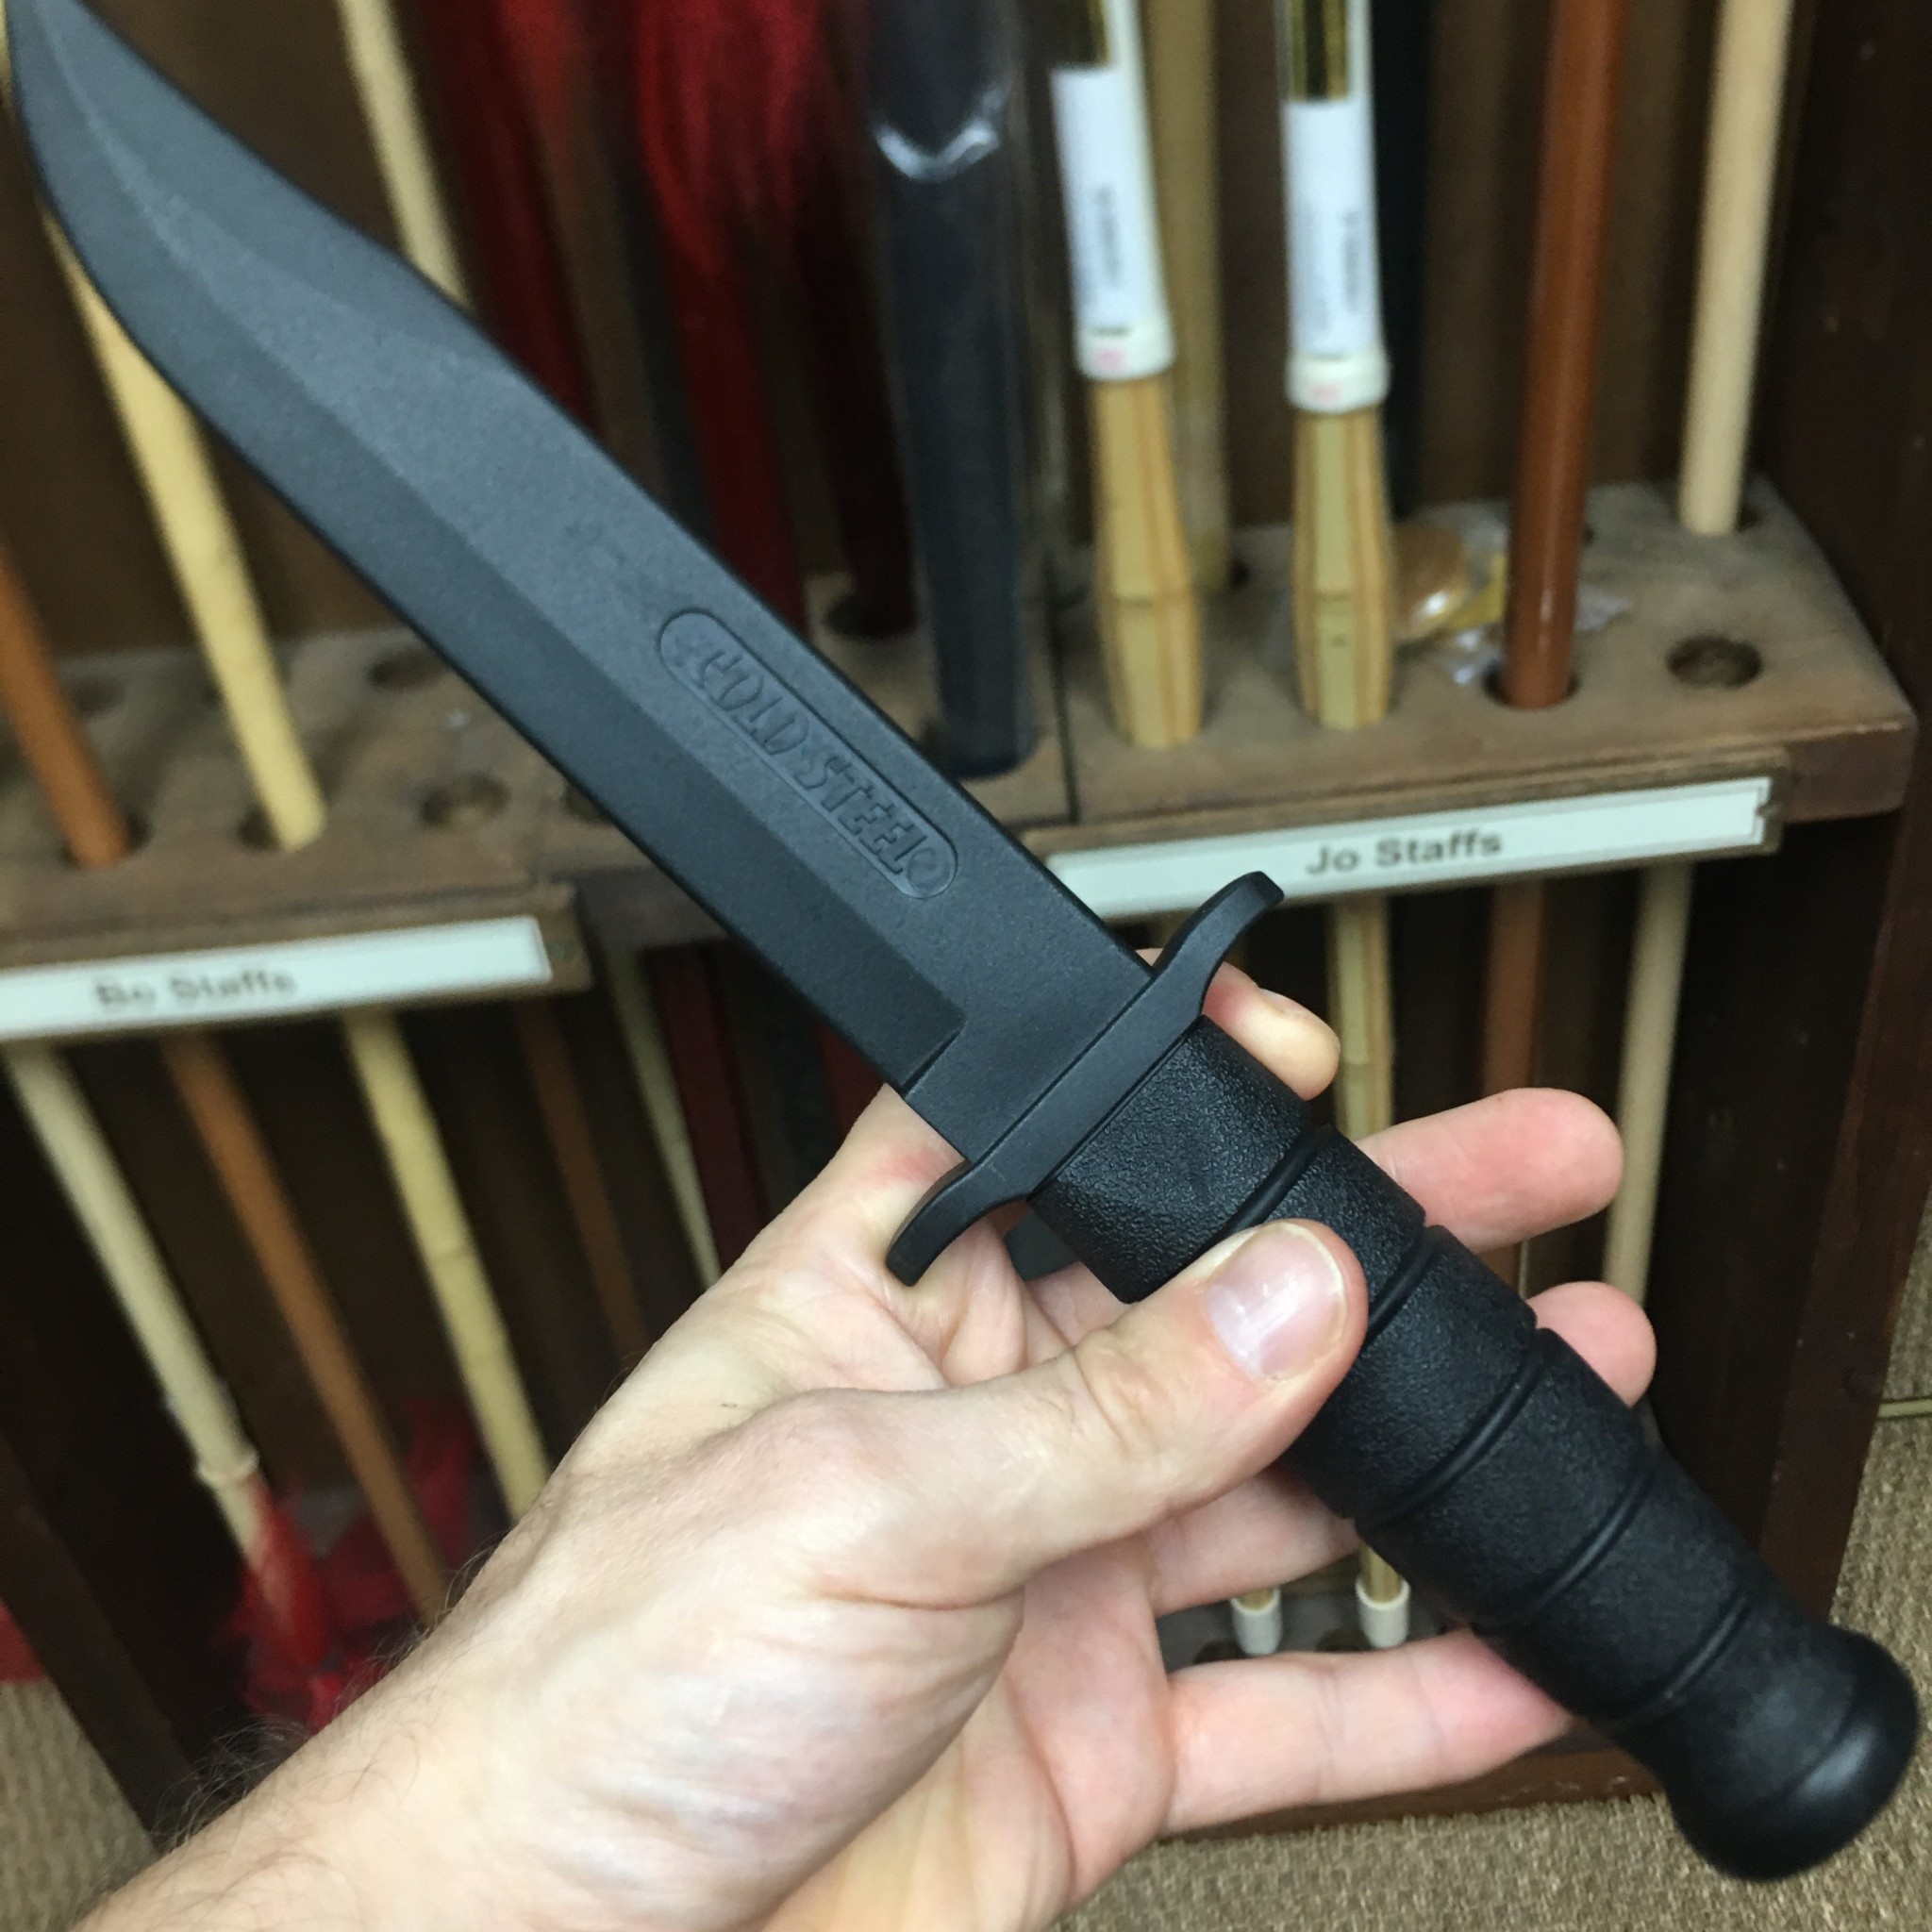 Cold Steel Training Knife - one of the best rubber knives - Enso Martial  Arts Shop Bristol